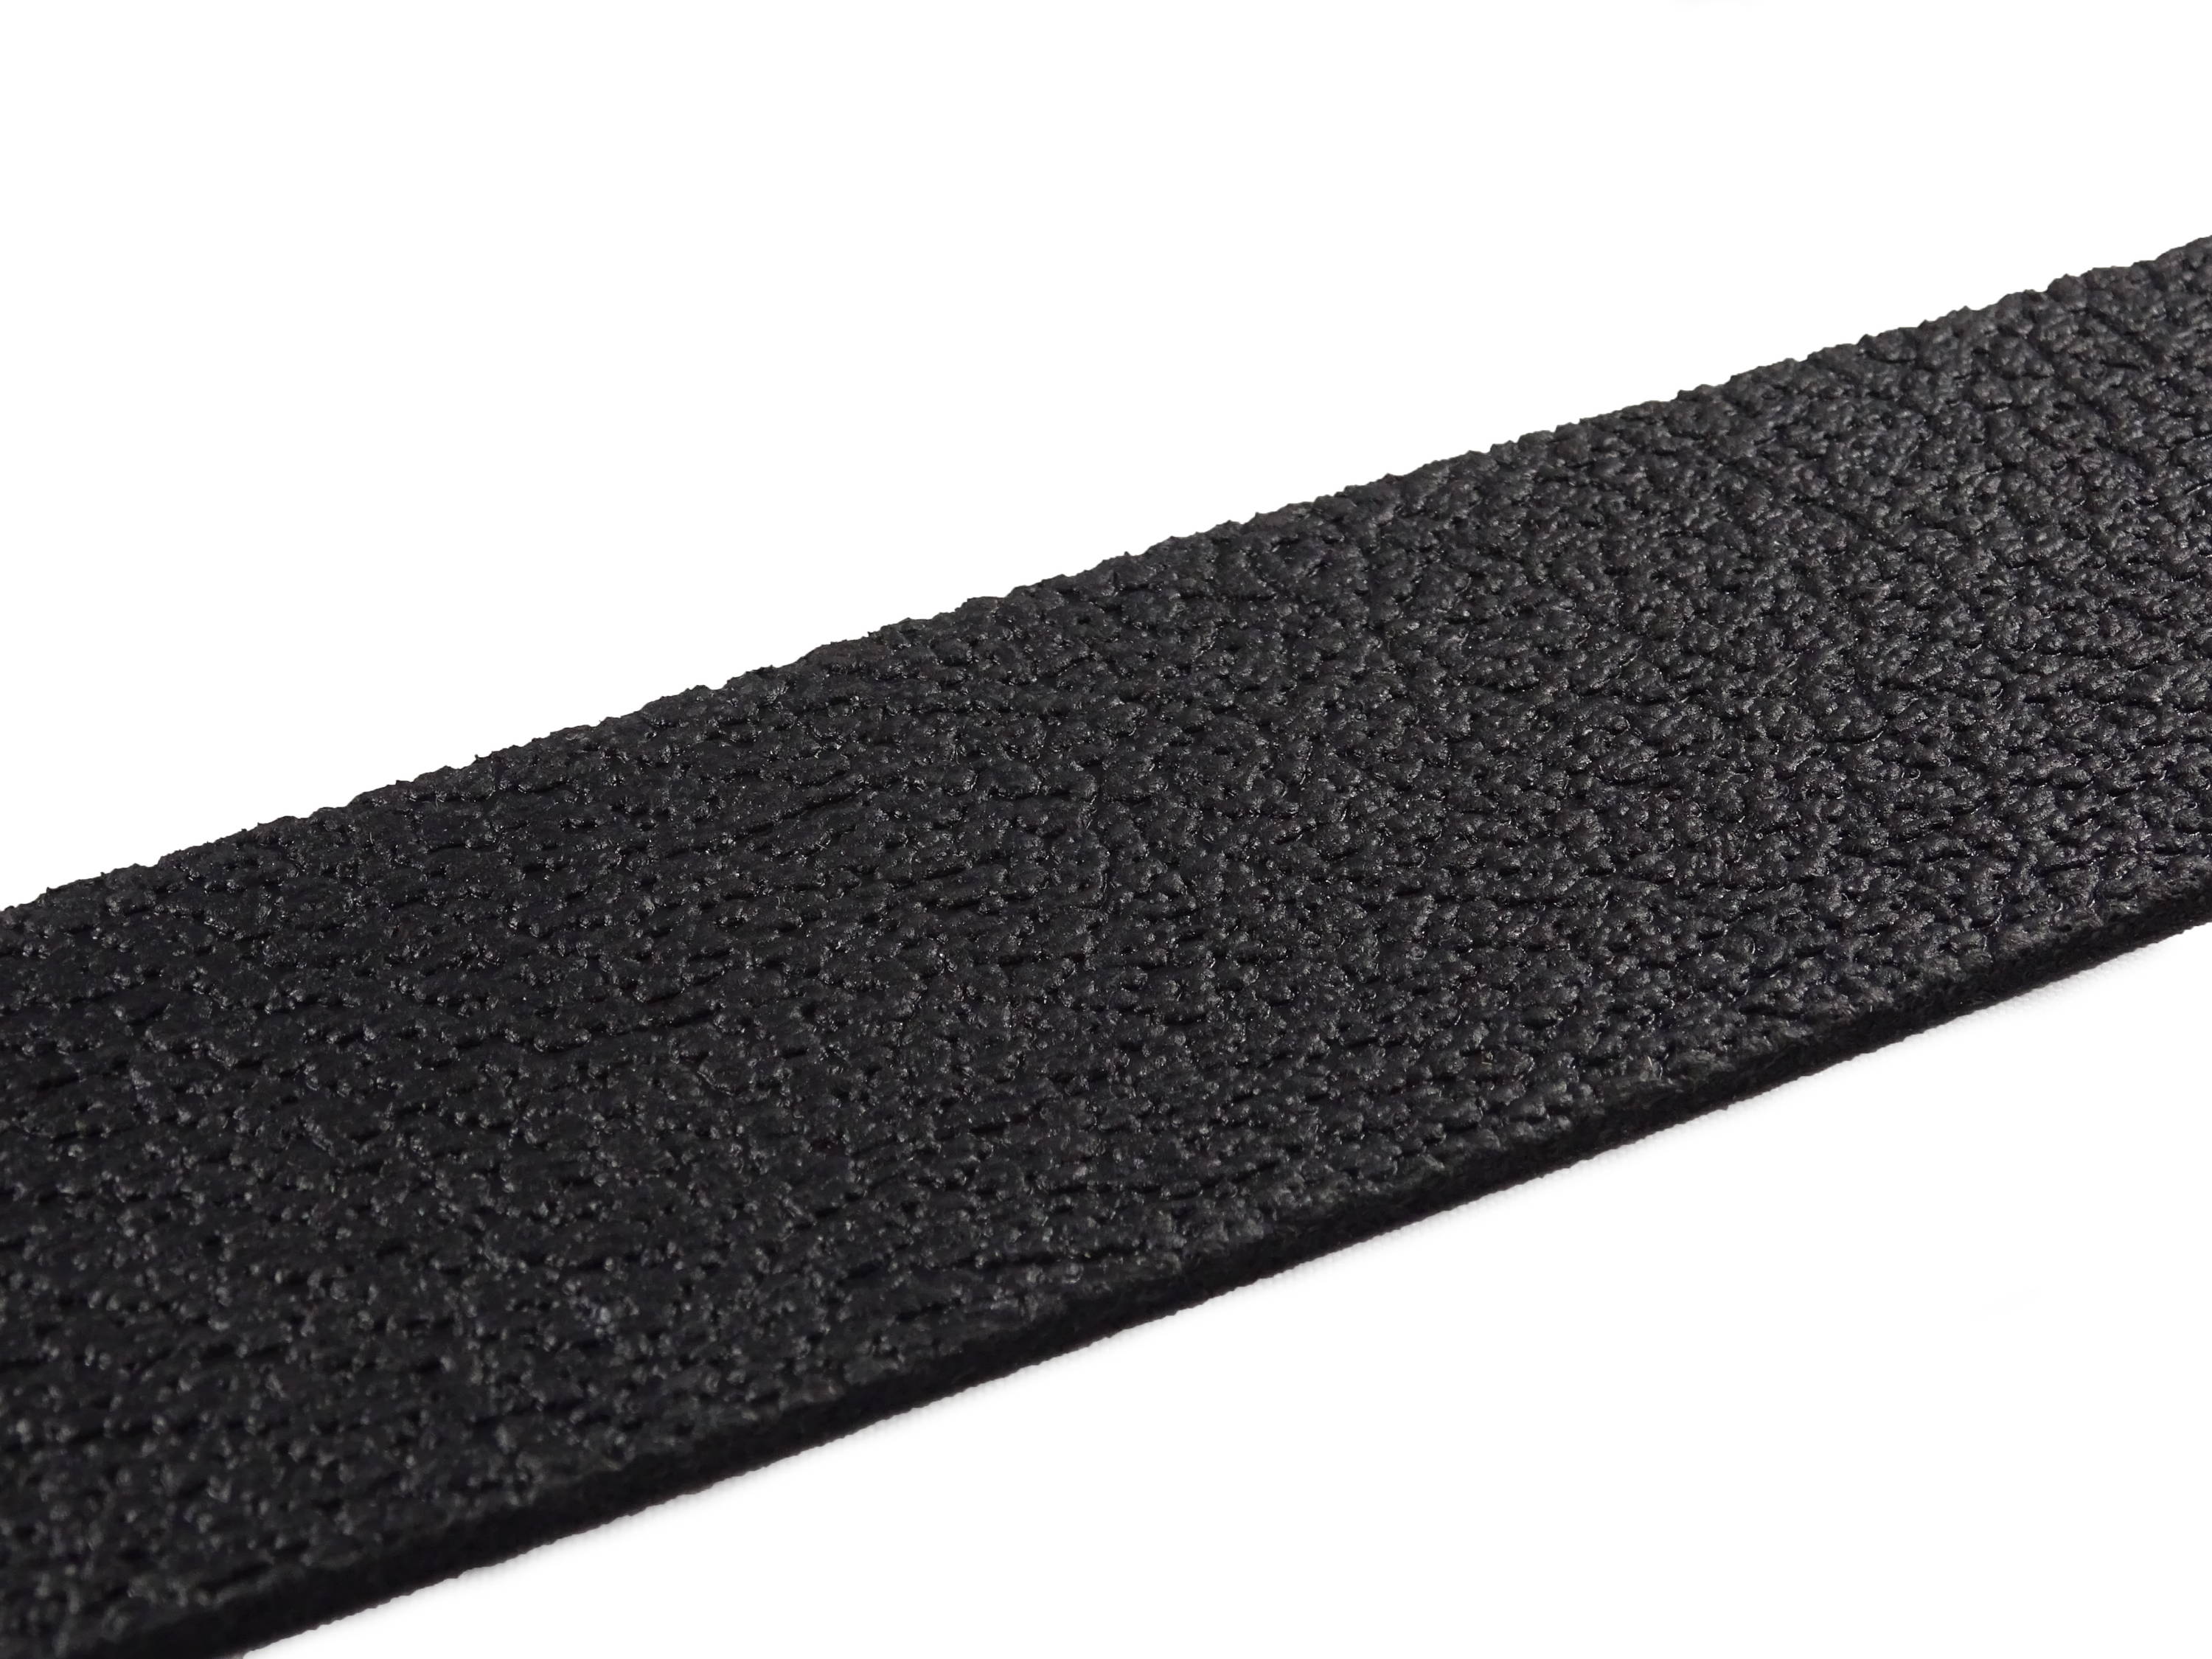 Sample of recycled rubber